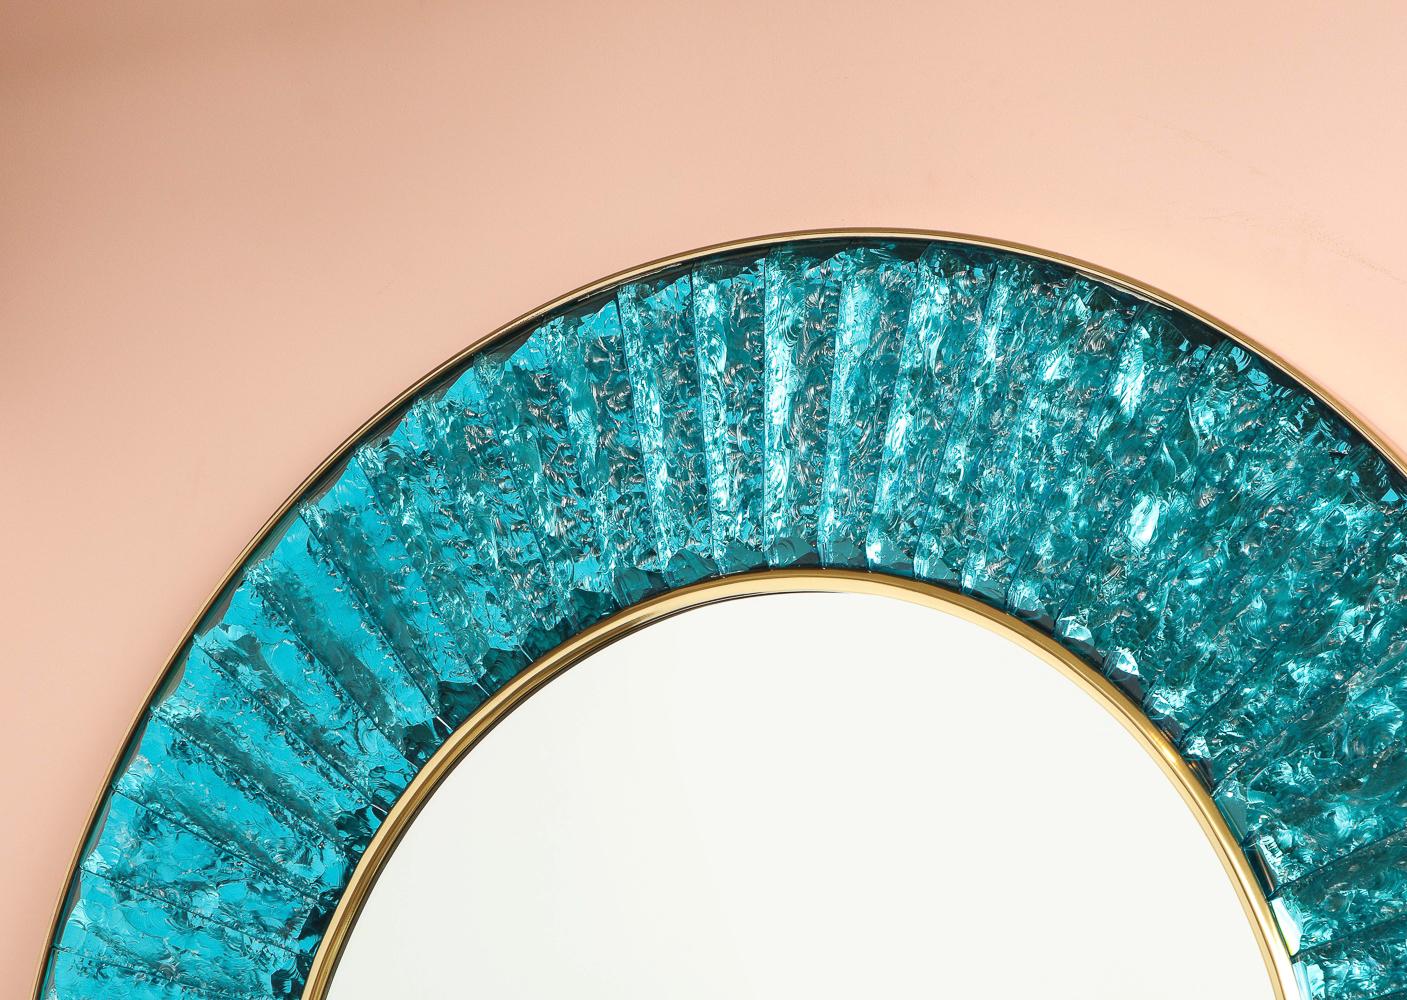 Contemporary wall mirror of hand-cut and chipped chunks of turquoise green glass. Arranged in a circle around a central mirror with brass mounts. Beautiful studio-made piece created exclusively for Donzella. Signed on side edge.